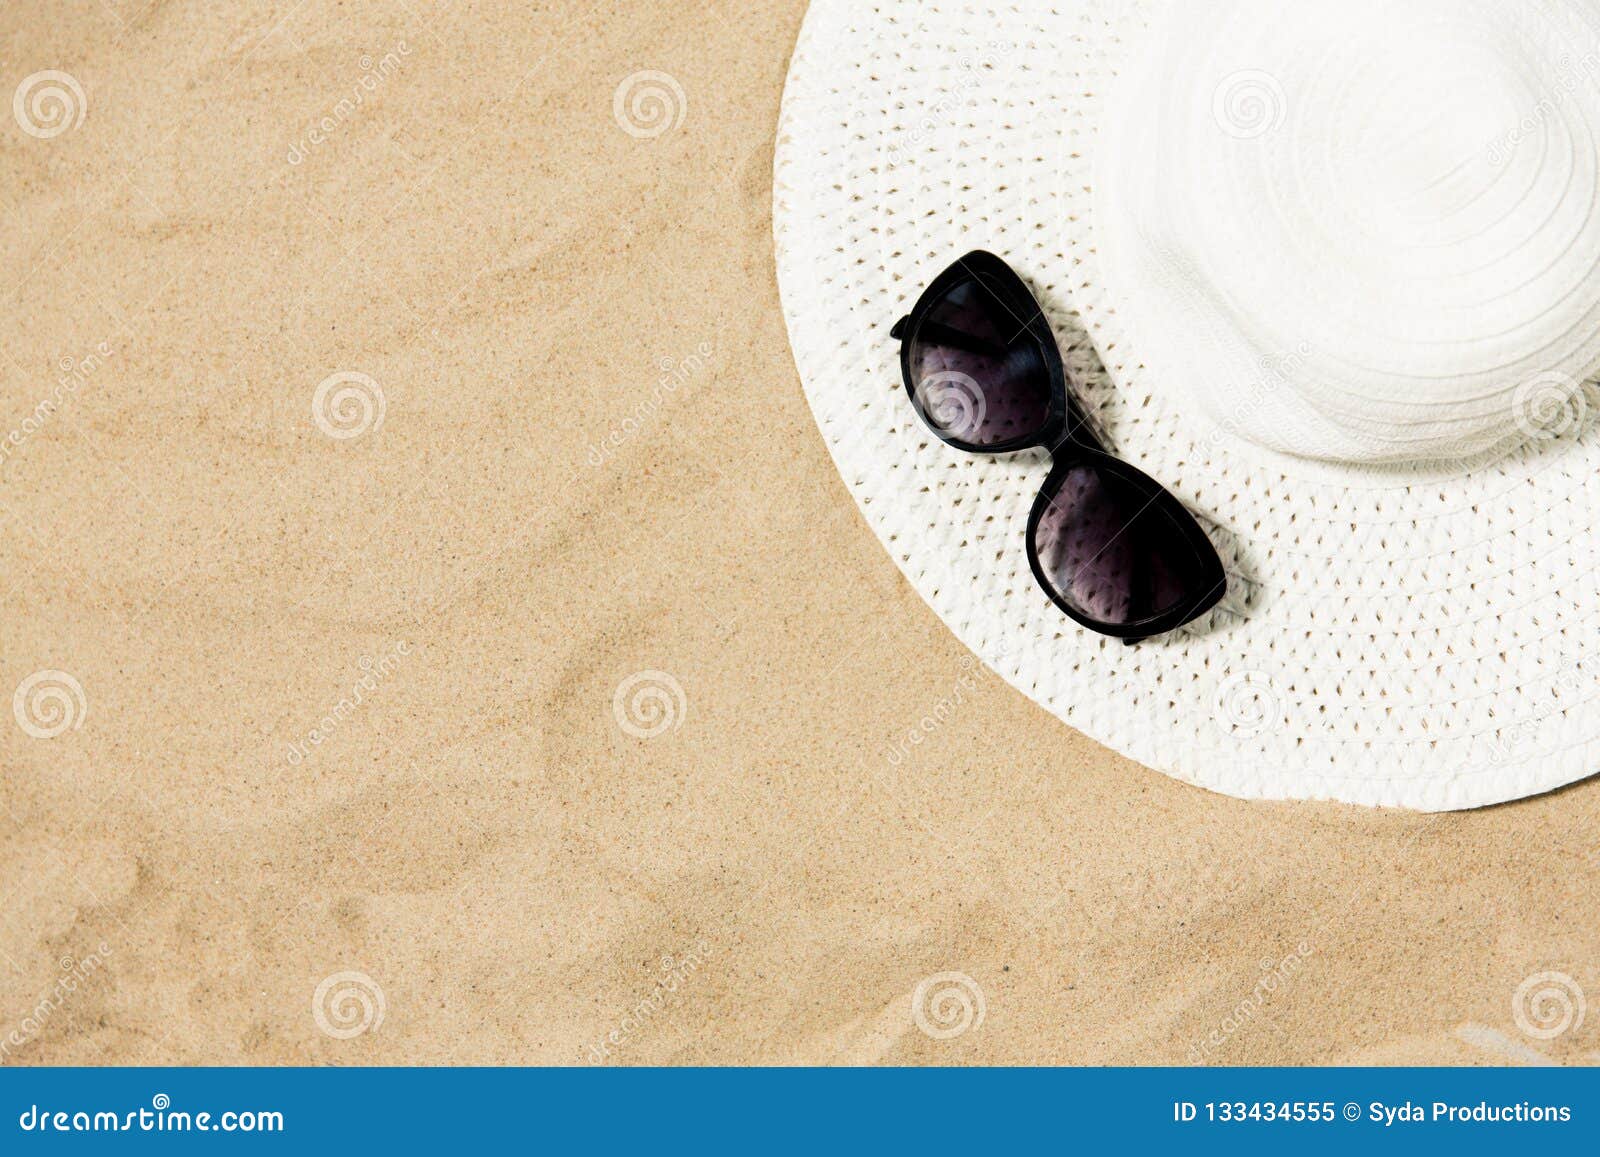 Straw Hat and Sunglasses on Beach Sand Stock Image - Image of summer ...